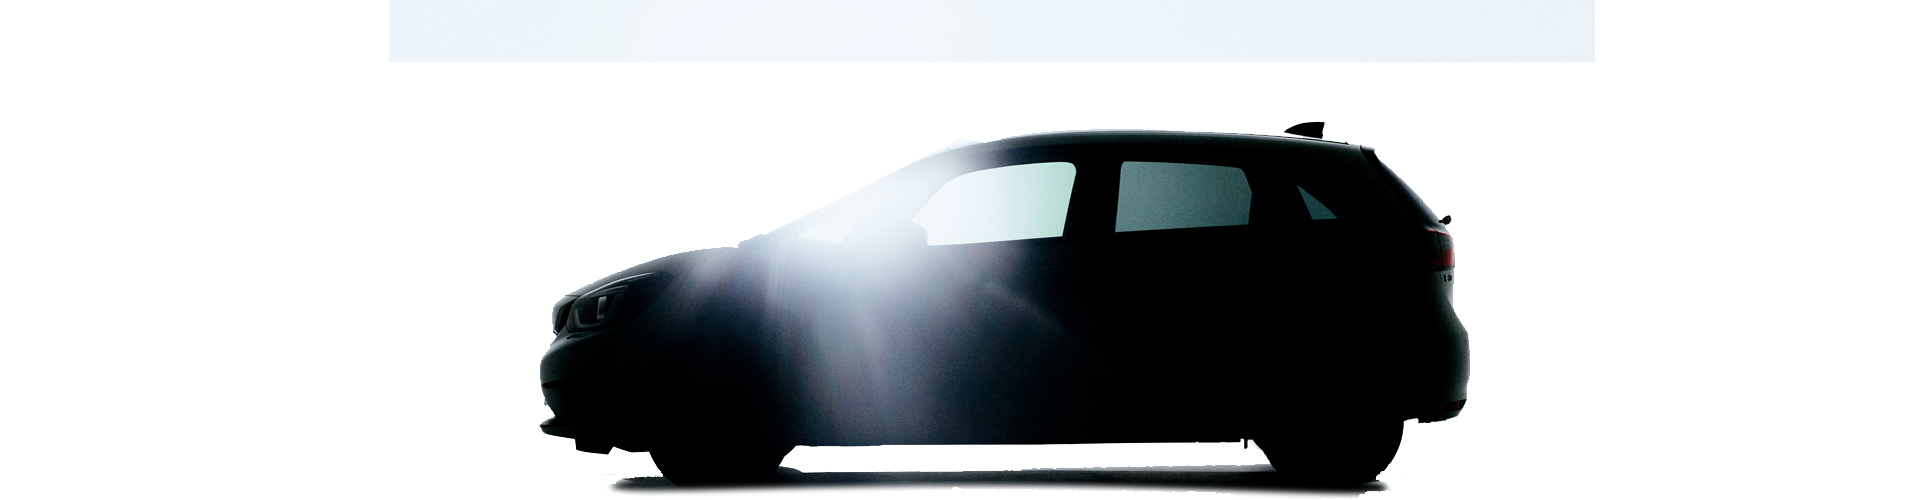 New Honda Jazz to be revealed at the Tokyo Motor Show